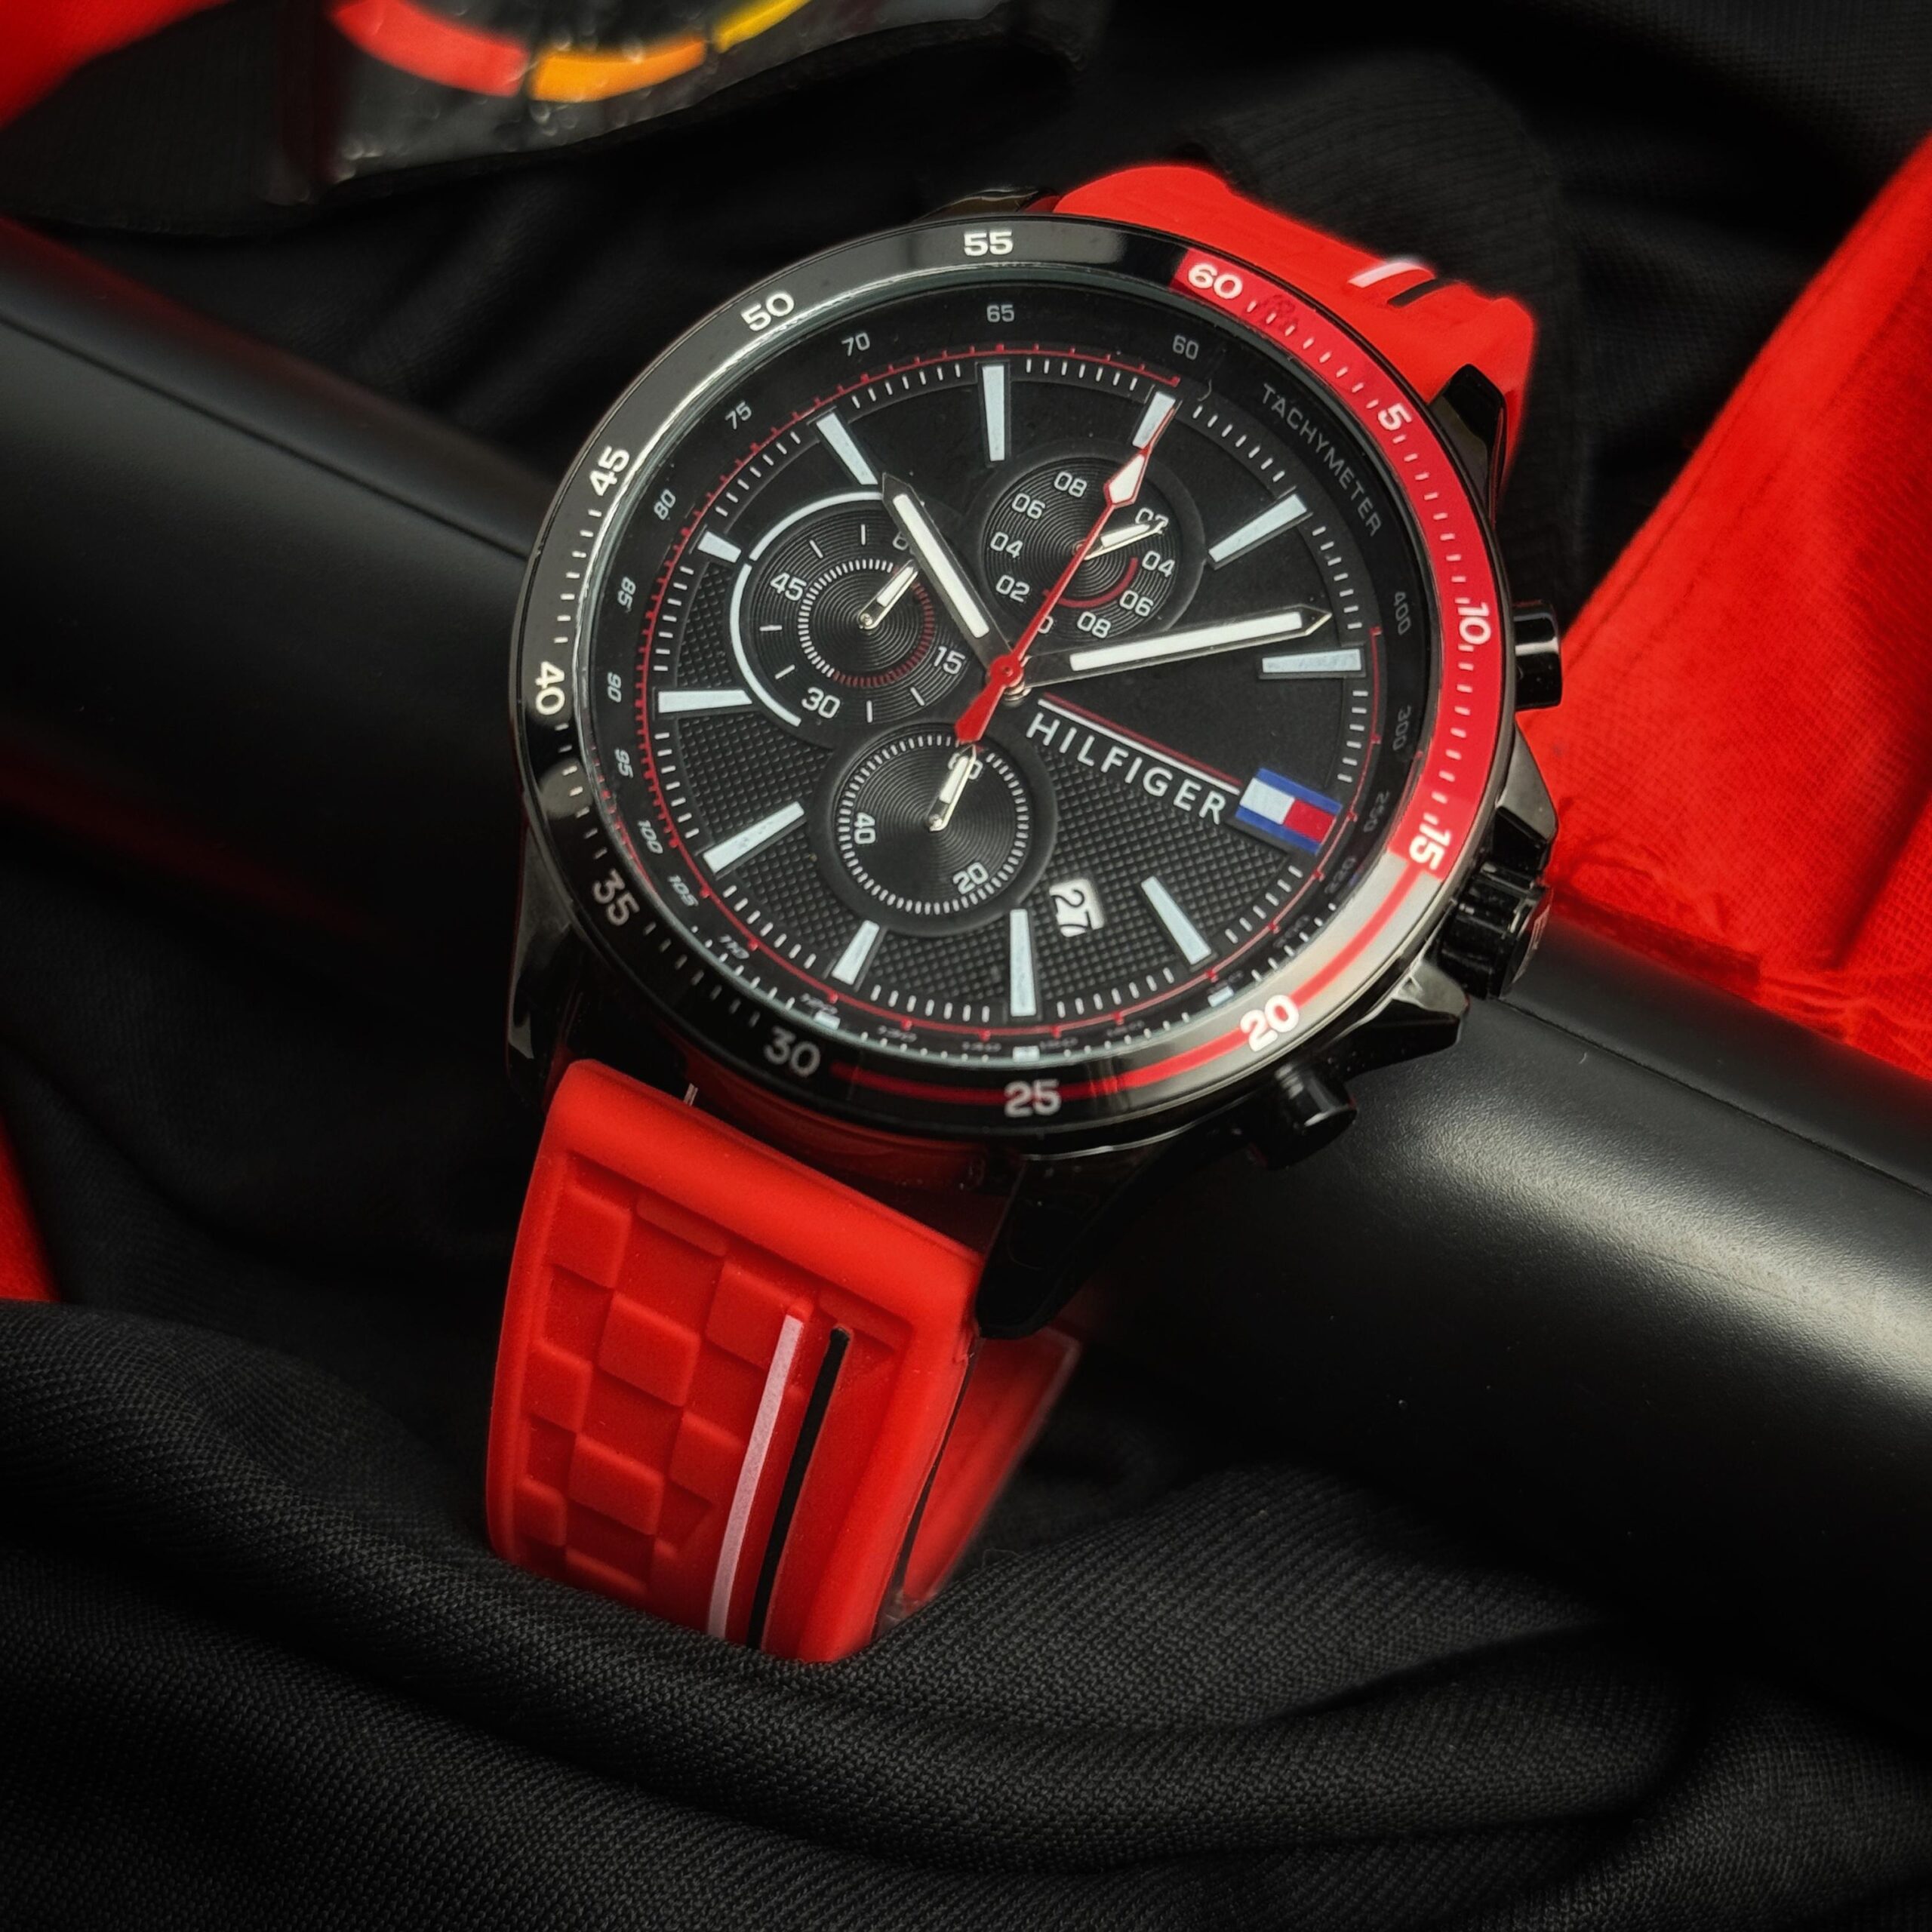 Tommy Hilfiger Black 42mm Chronograph Series Watch – Durable, Stylish Perfect for the Festive Season